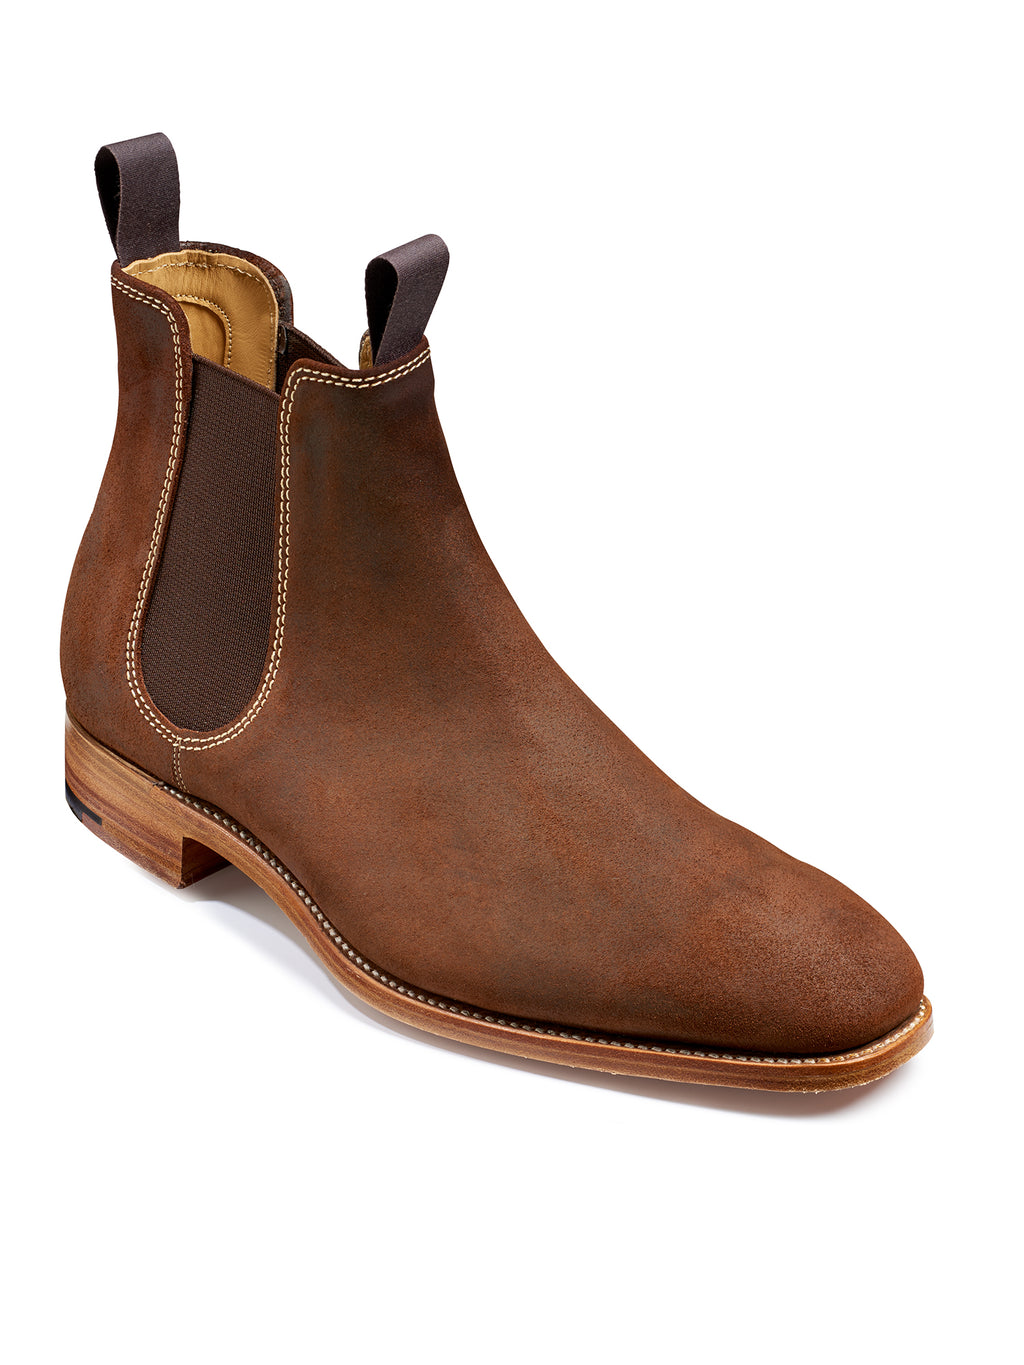 mansfield brown waxy suede chelsea boot barker shoes